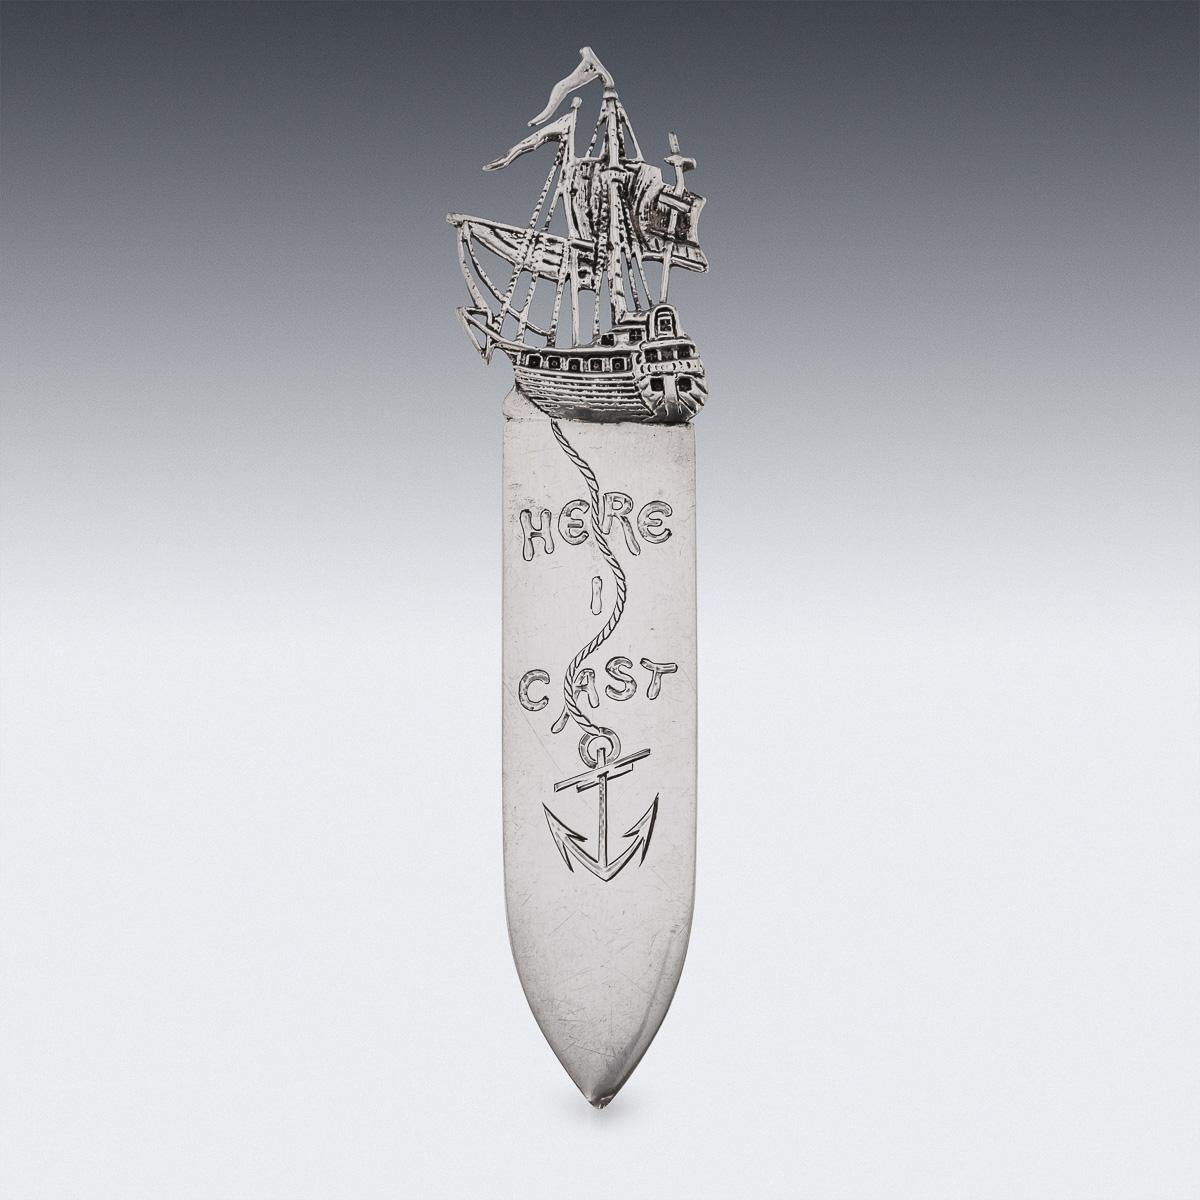 Antiques early 20th Century Victorian solid silver novelty bookmark. This bookmark depicts a ship with a dropped anchor and reads 'Here I Cast'. It is easy to imagine the appeal behind these bookmarks as a superb gift or personal possession. As